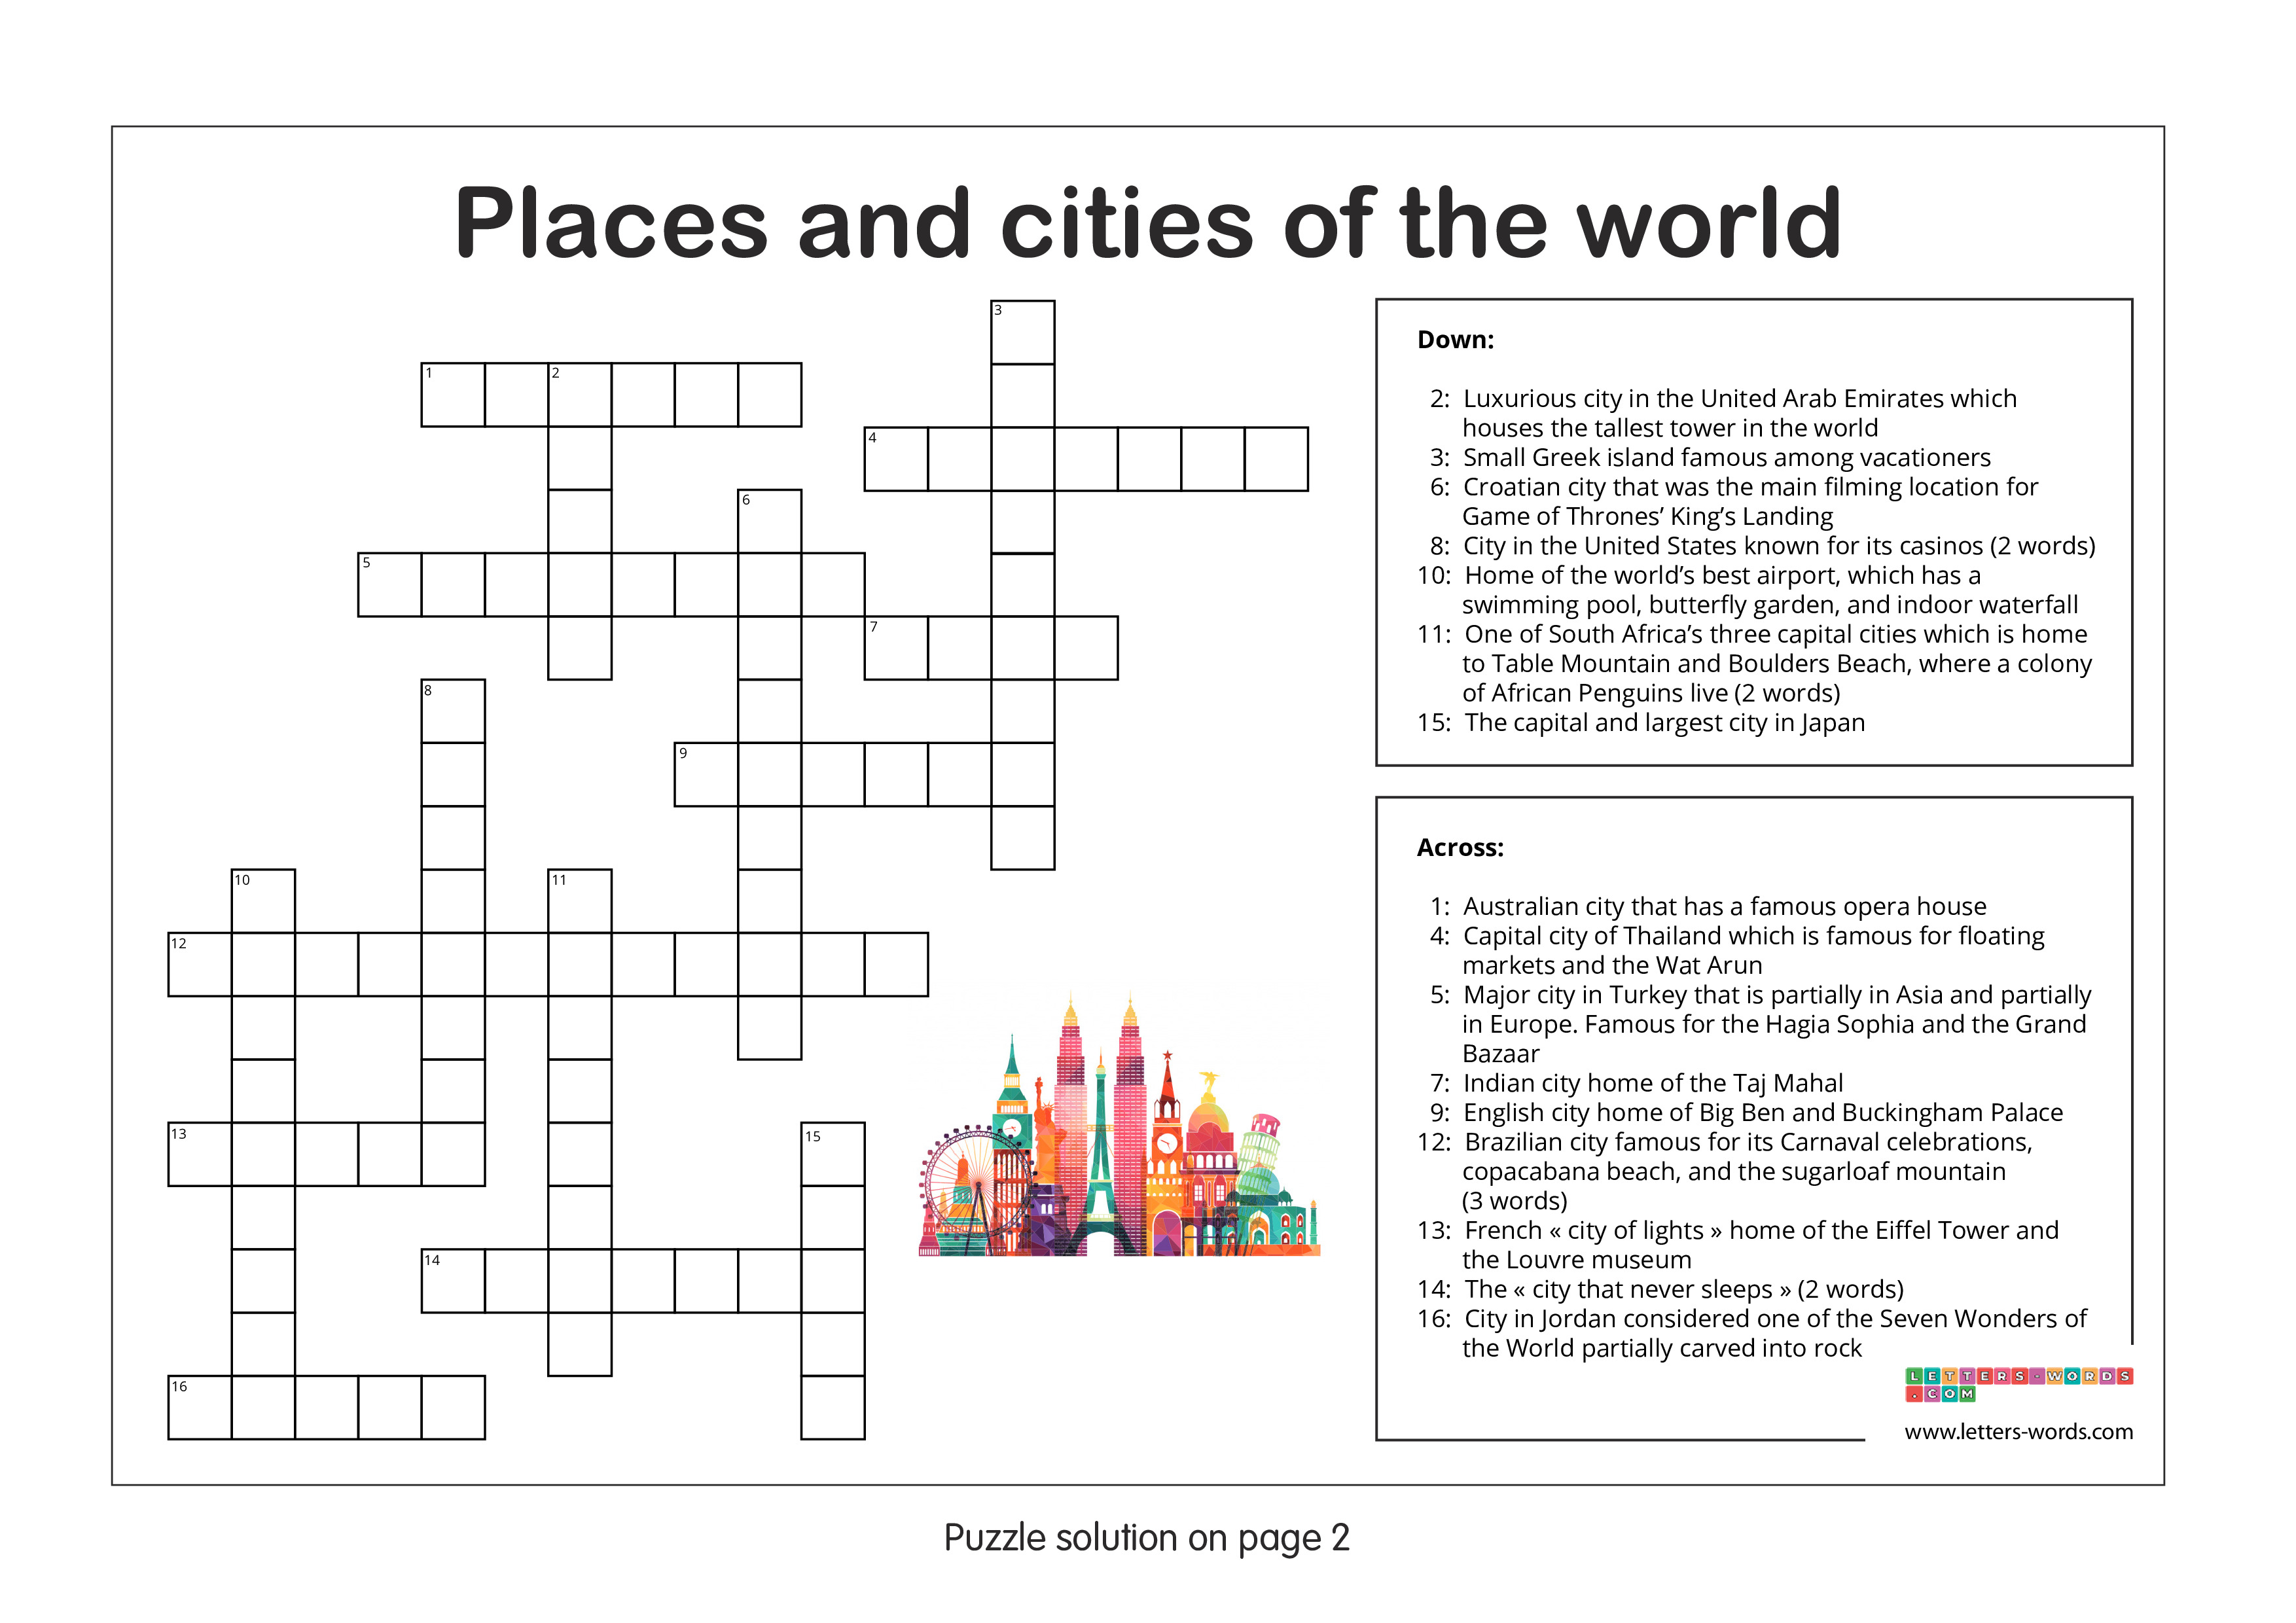 Crossword puzzles for children aged 12+ - Places and Cities